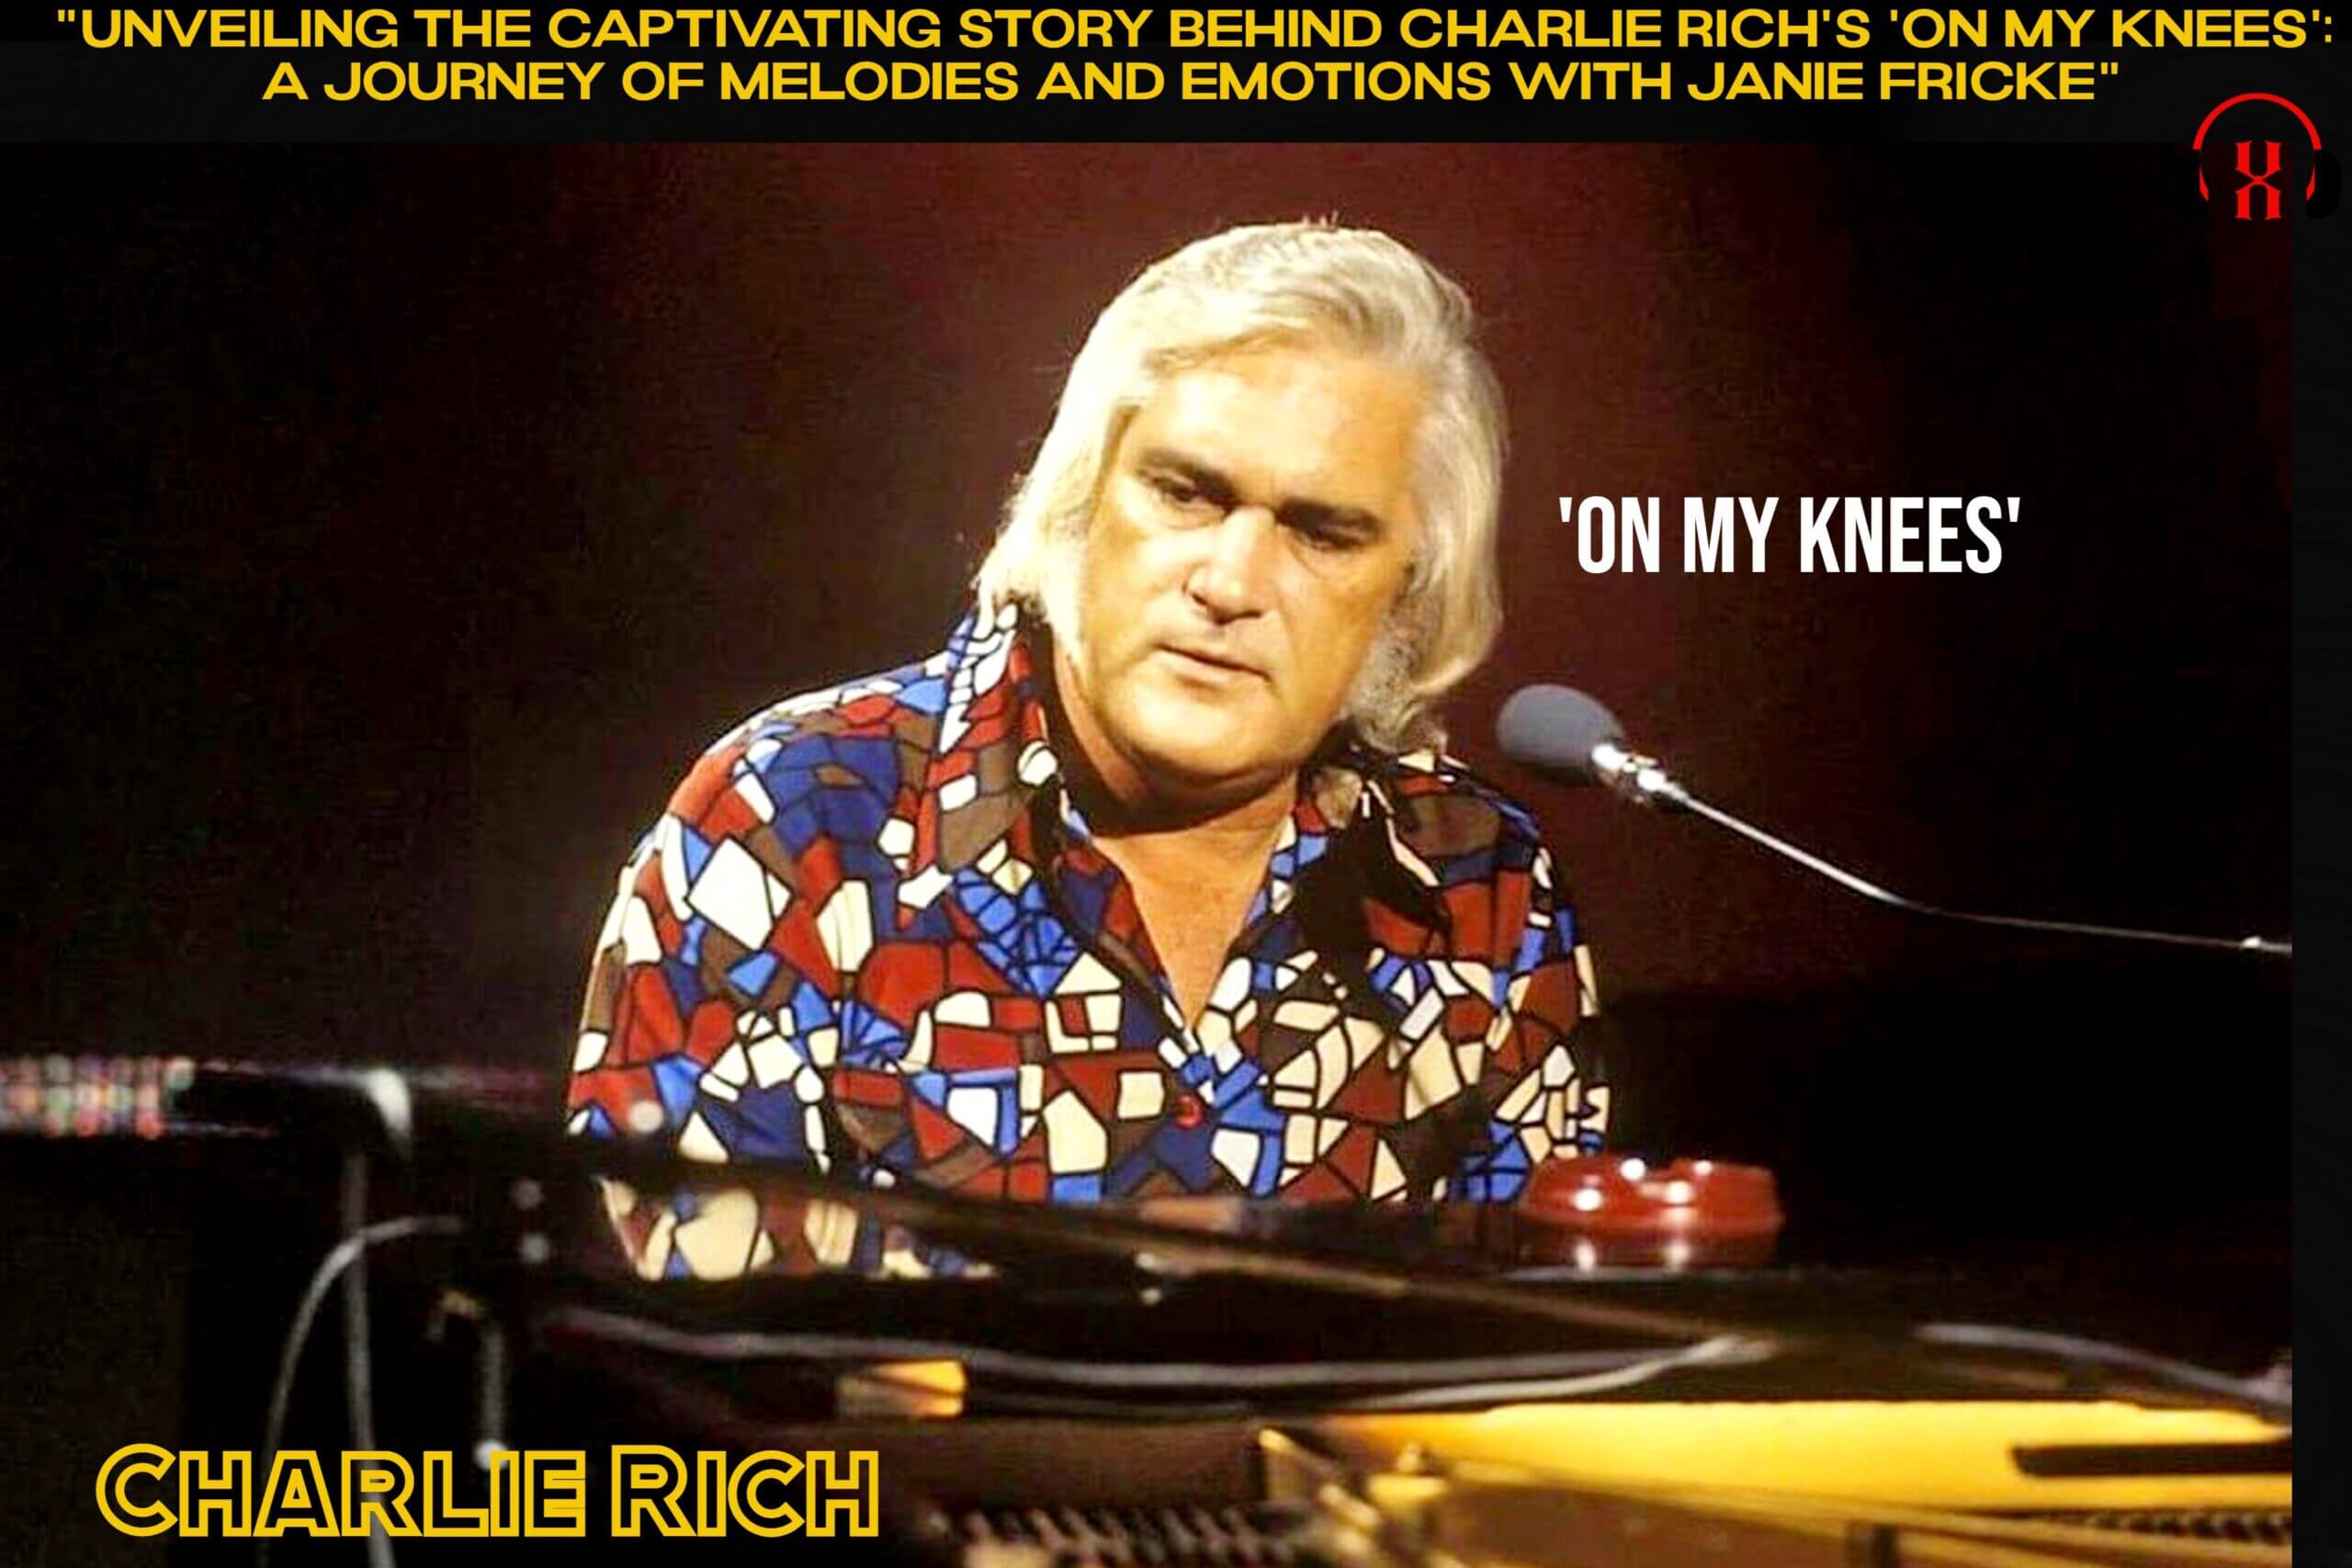 Charlie Rich's 'On My Knees': A Journey of Melodies and Emotions with Janie Fricke"